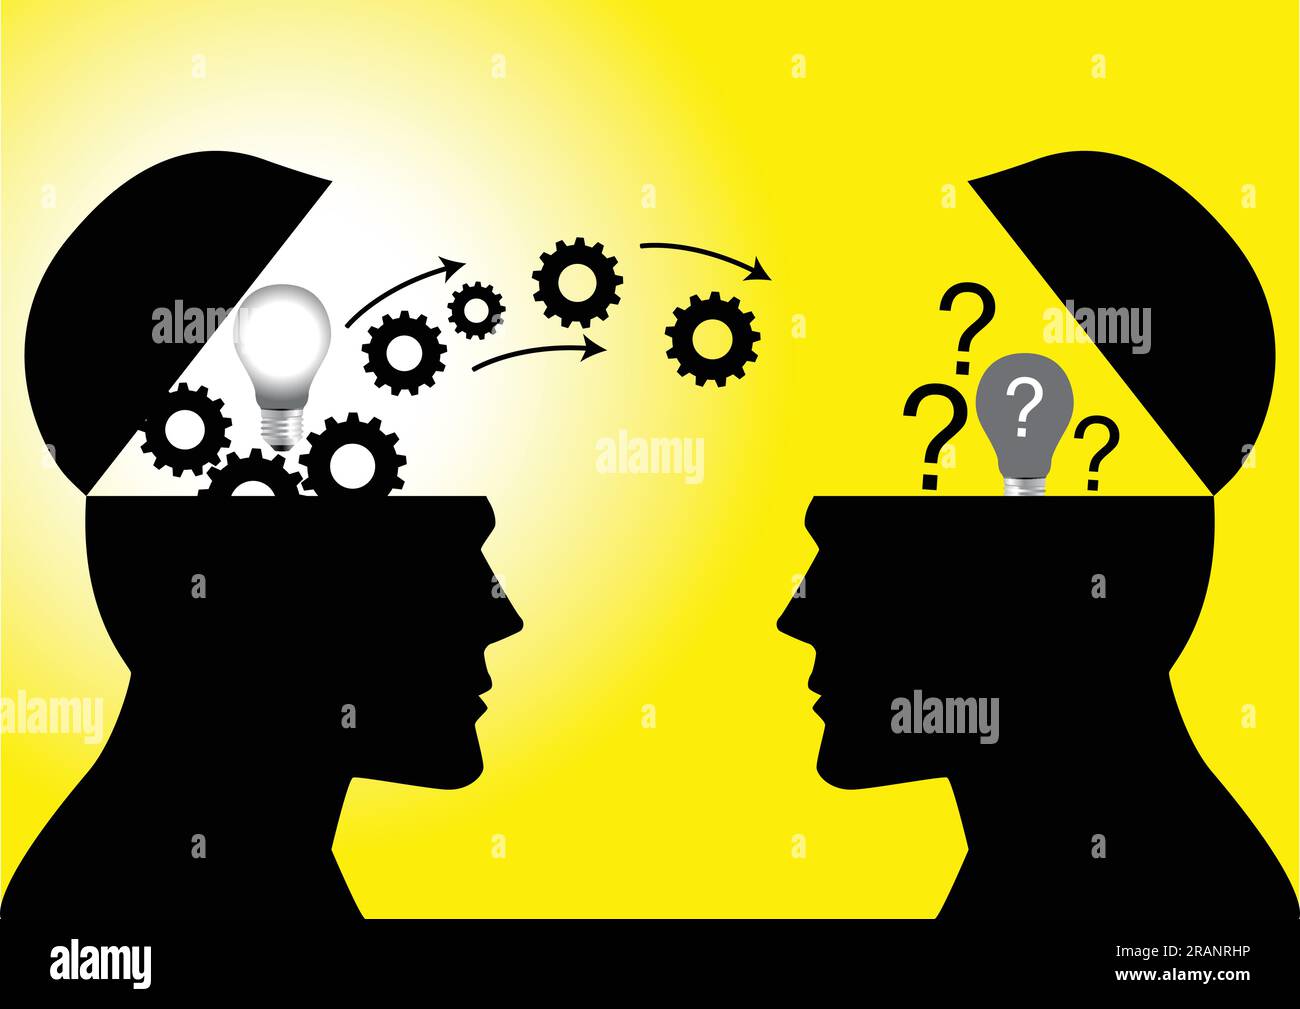 Knowledge or ideas sharing between two people head, transferring knowledge, innovation, brain storming concept Stock Vector